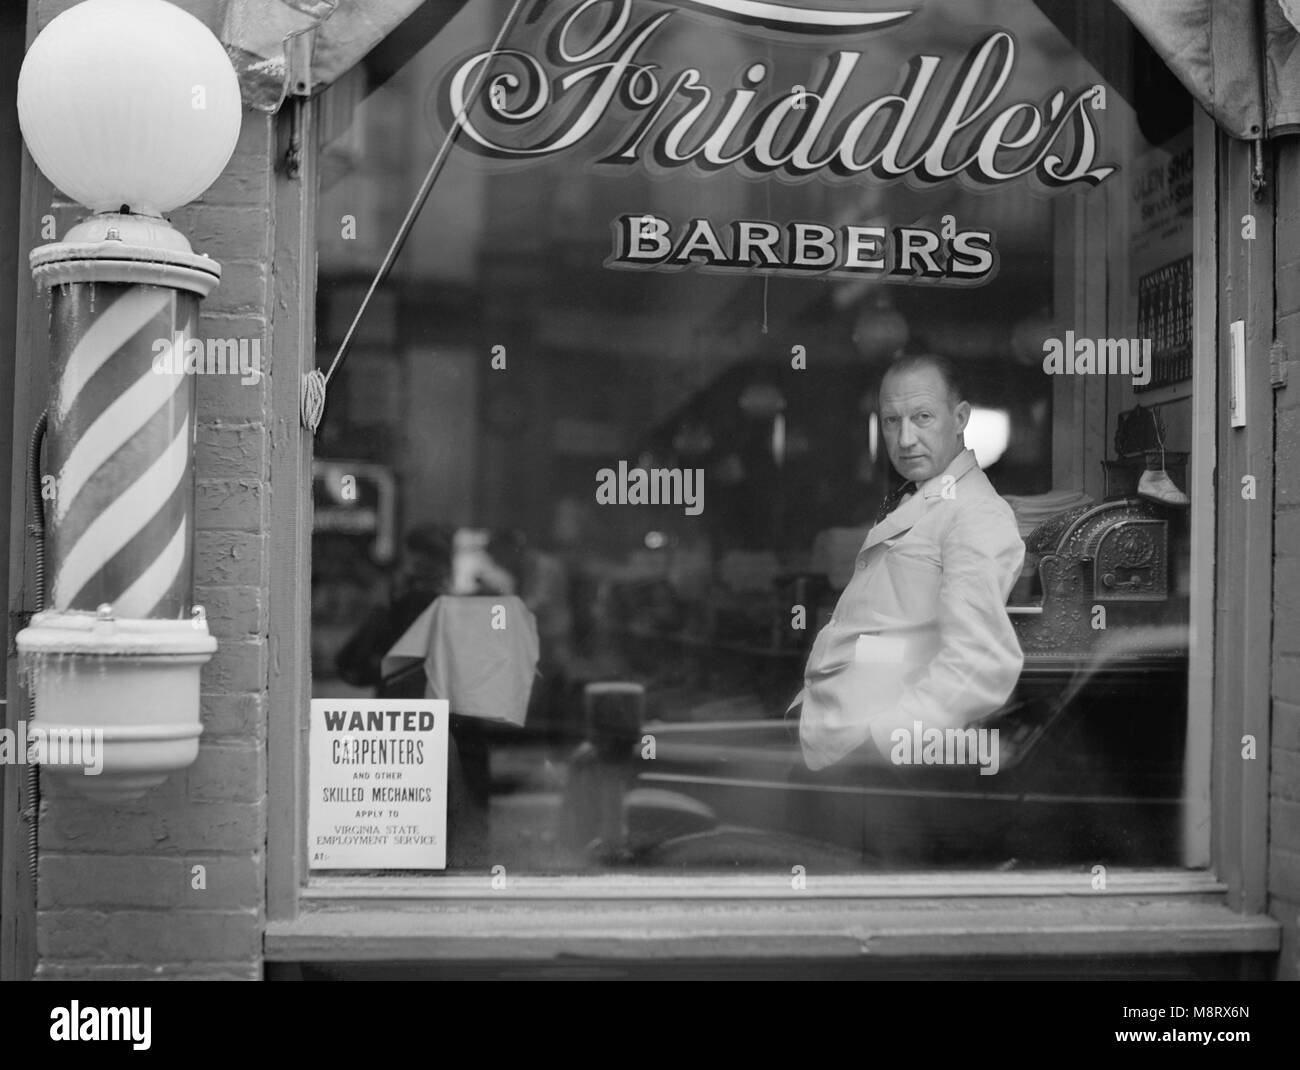 Portrait of Barber in Barber Shop Window, Help Wanted Sign Looking for Skilled Labor Resources Posted in Window by Virginia State Employment Service, Friddle's Barbers, Harrisonburg, Virginia, USA, John Vachon for Office for Emergency Management, May 1941 Stock Photo